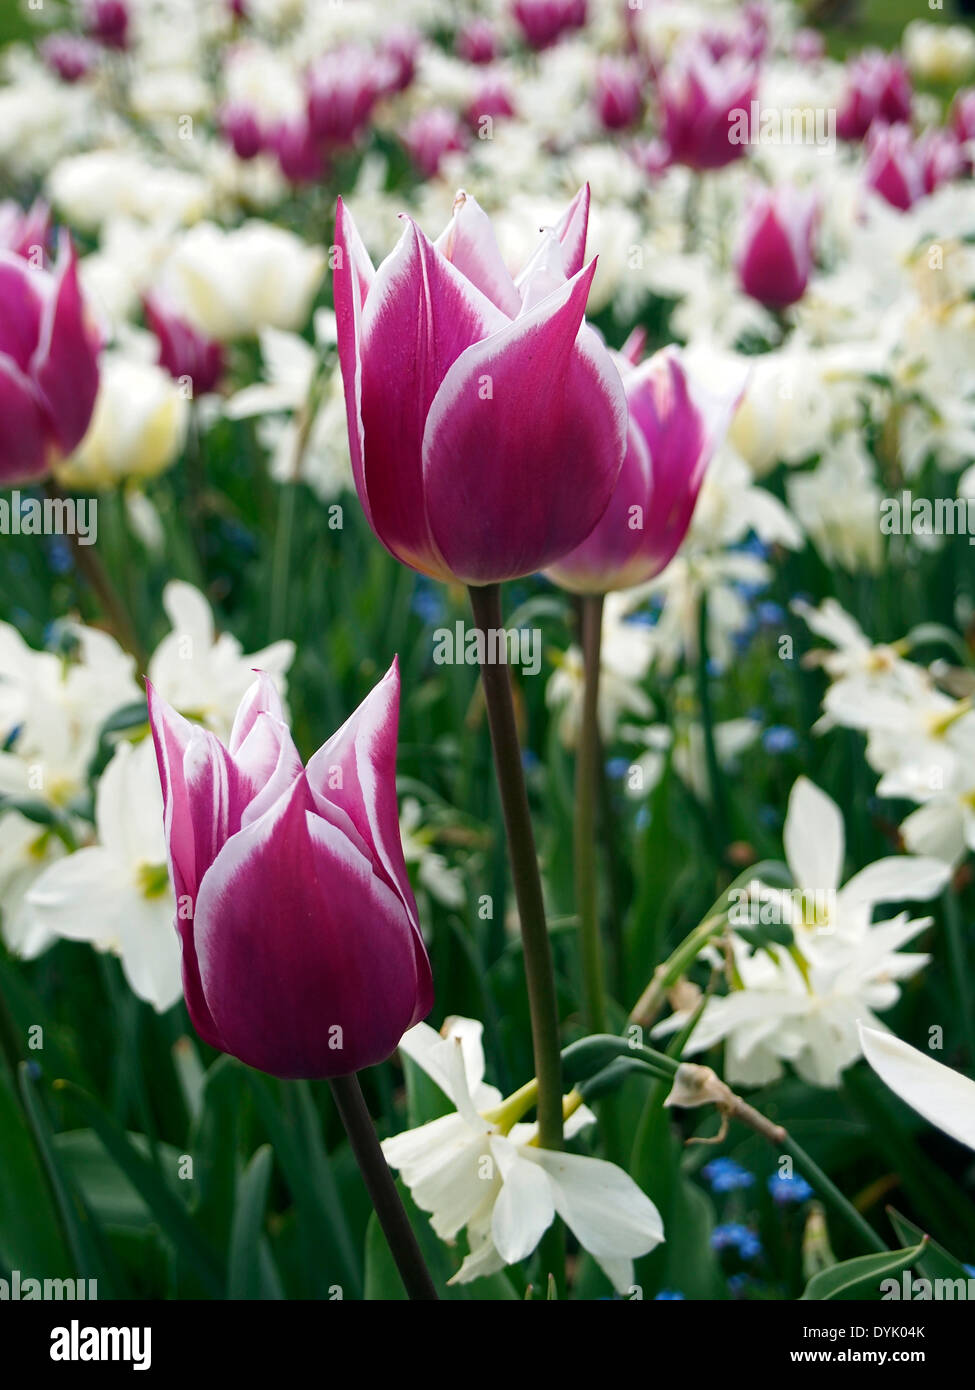 Tulipa Ballade Or Ballade Tulip A Lily Flowered Variety That Stock Photo Alamy